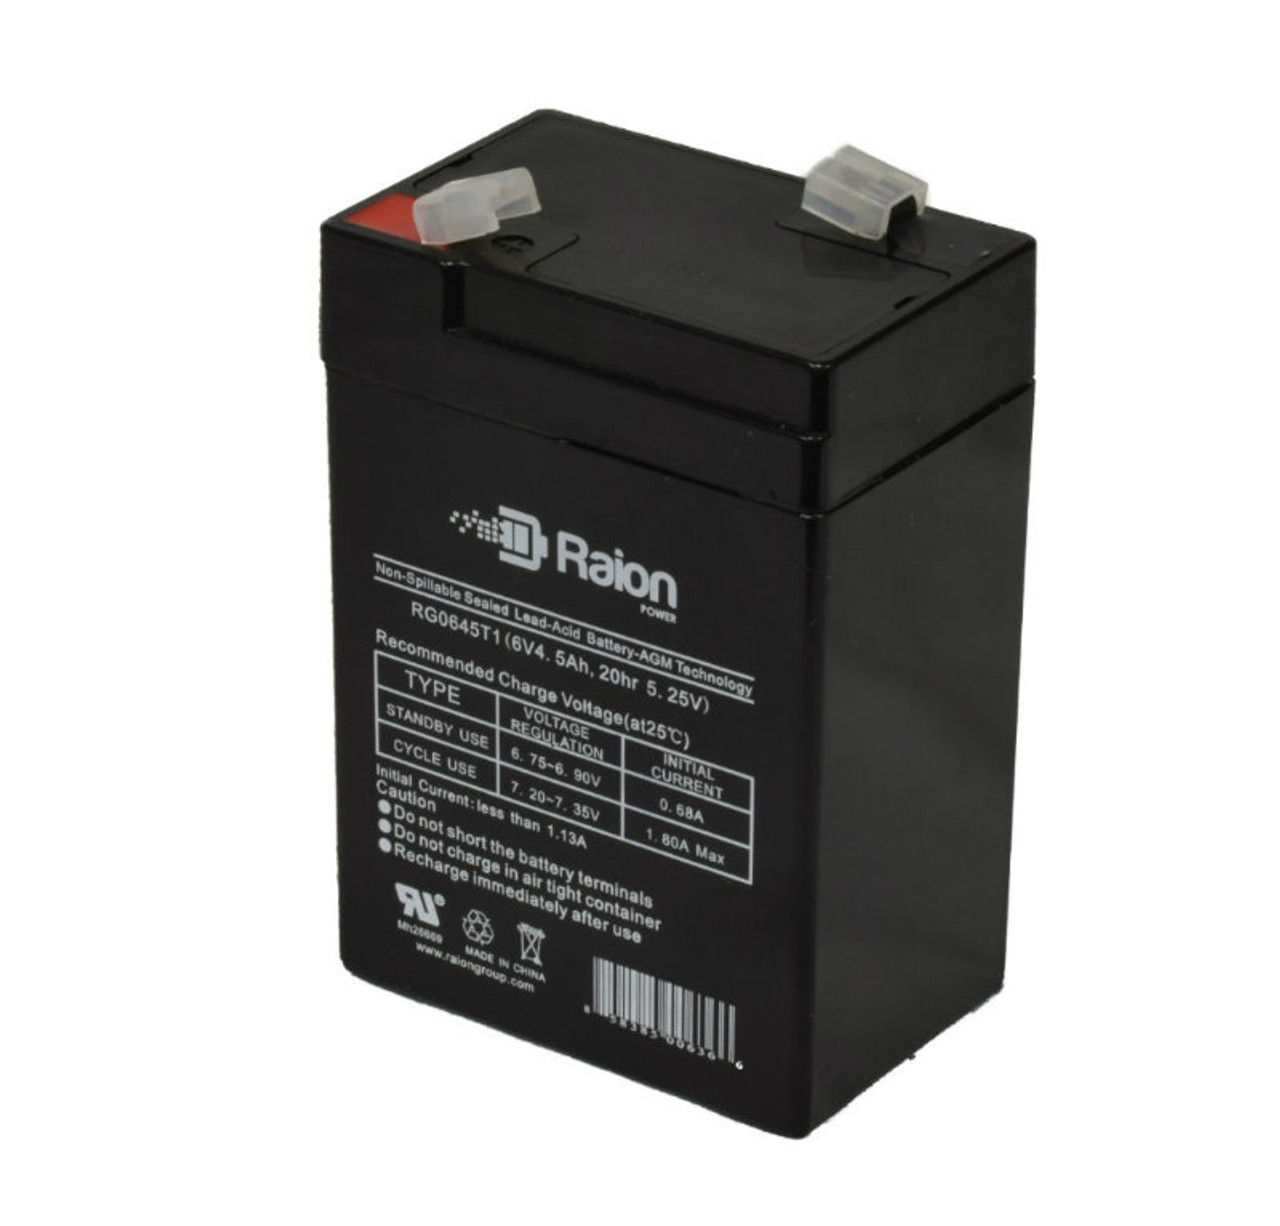 Raion Power RG0645T1 6V 4.5Ah Replacement Battery Cartridge for Emergency EML-960